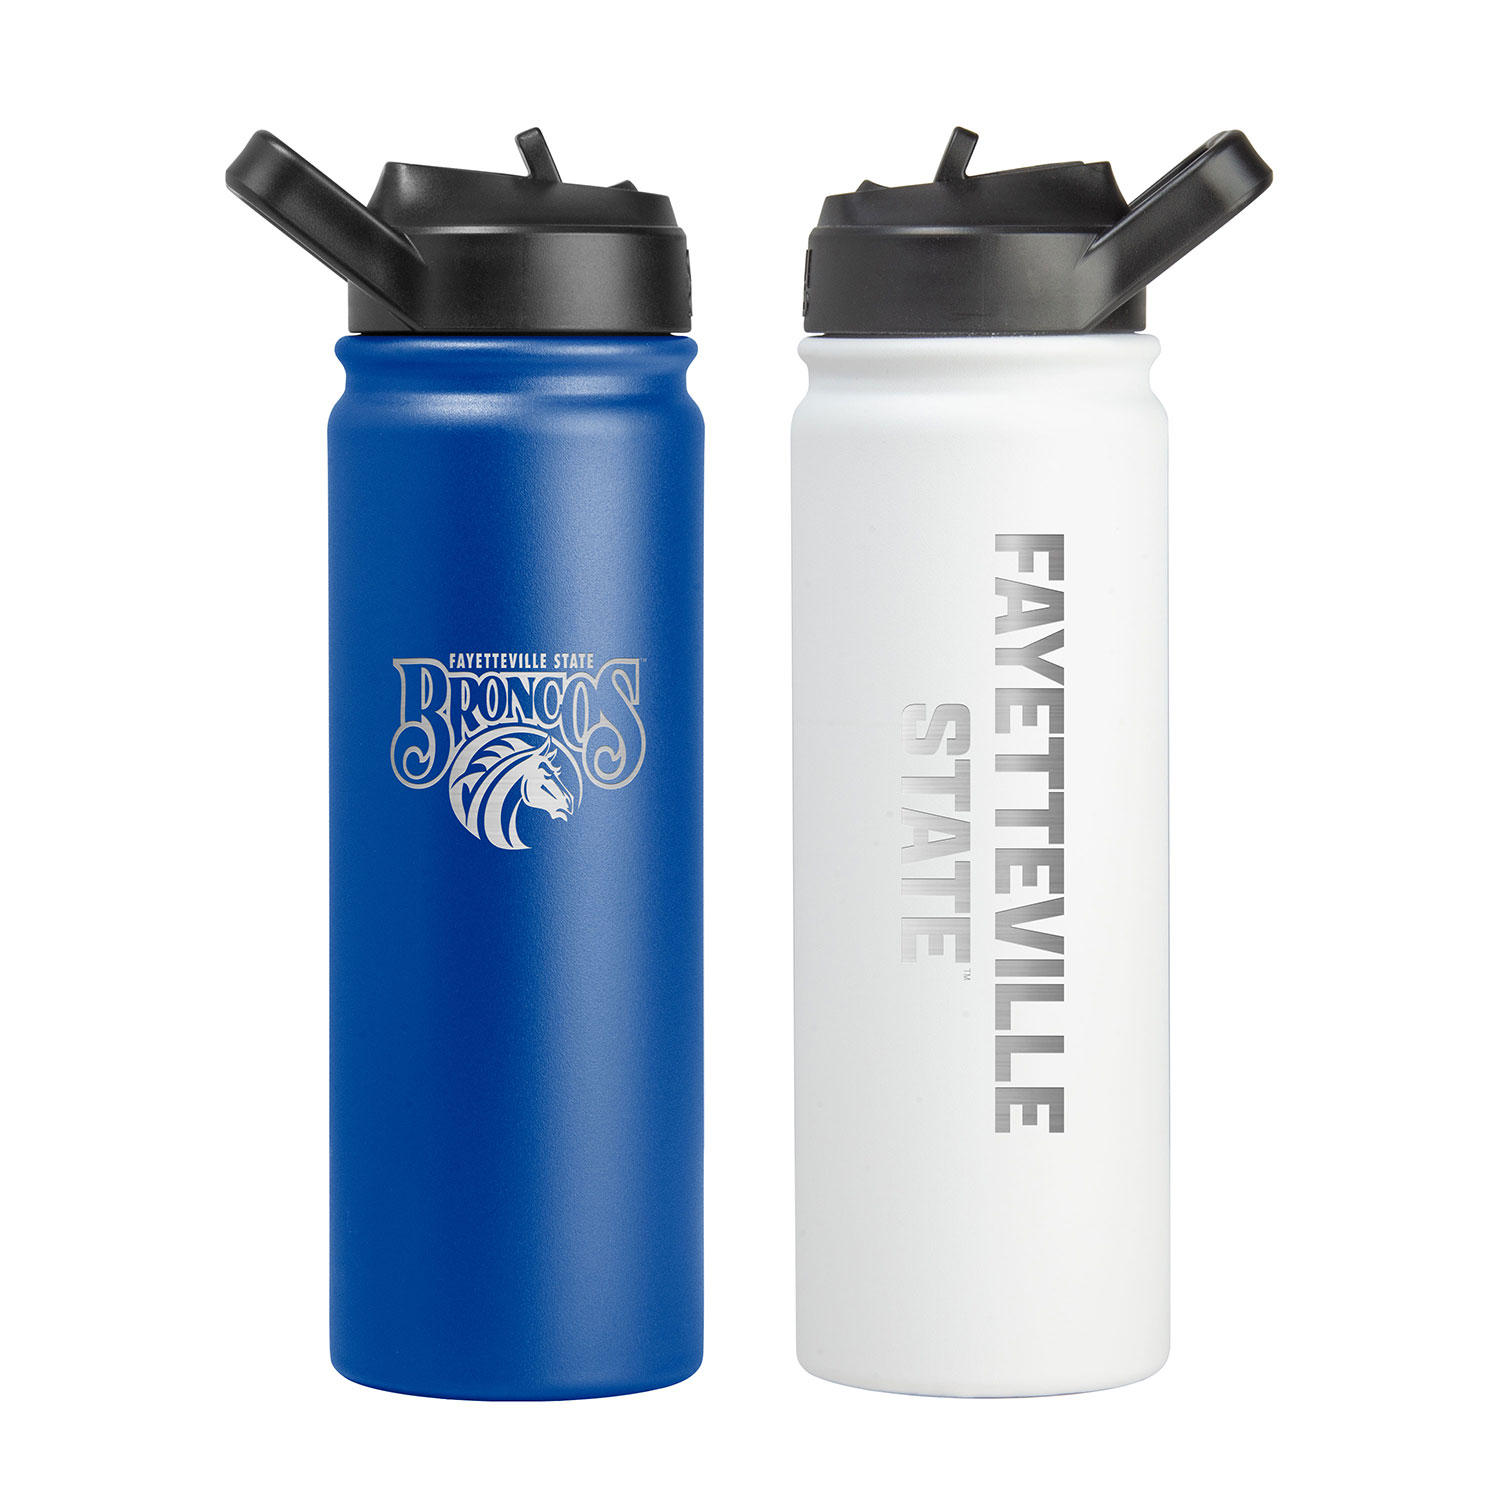 Logo Brands HBCU 24oz Stainless Steel Water Bottle, 2 Pack - Fayetteville State Broncos